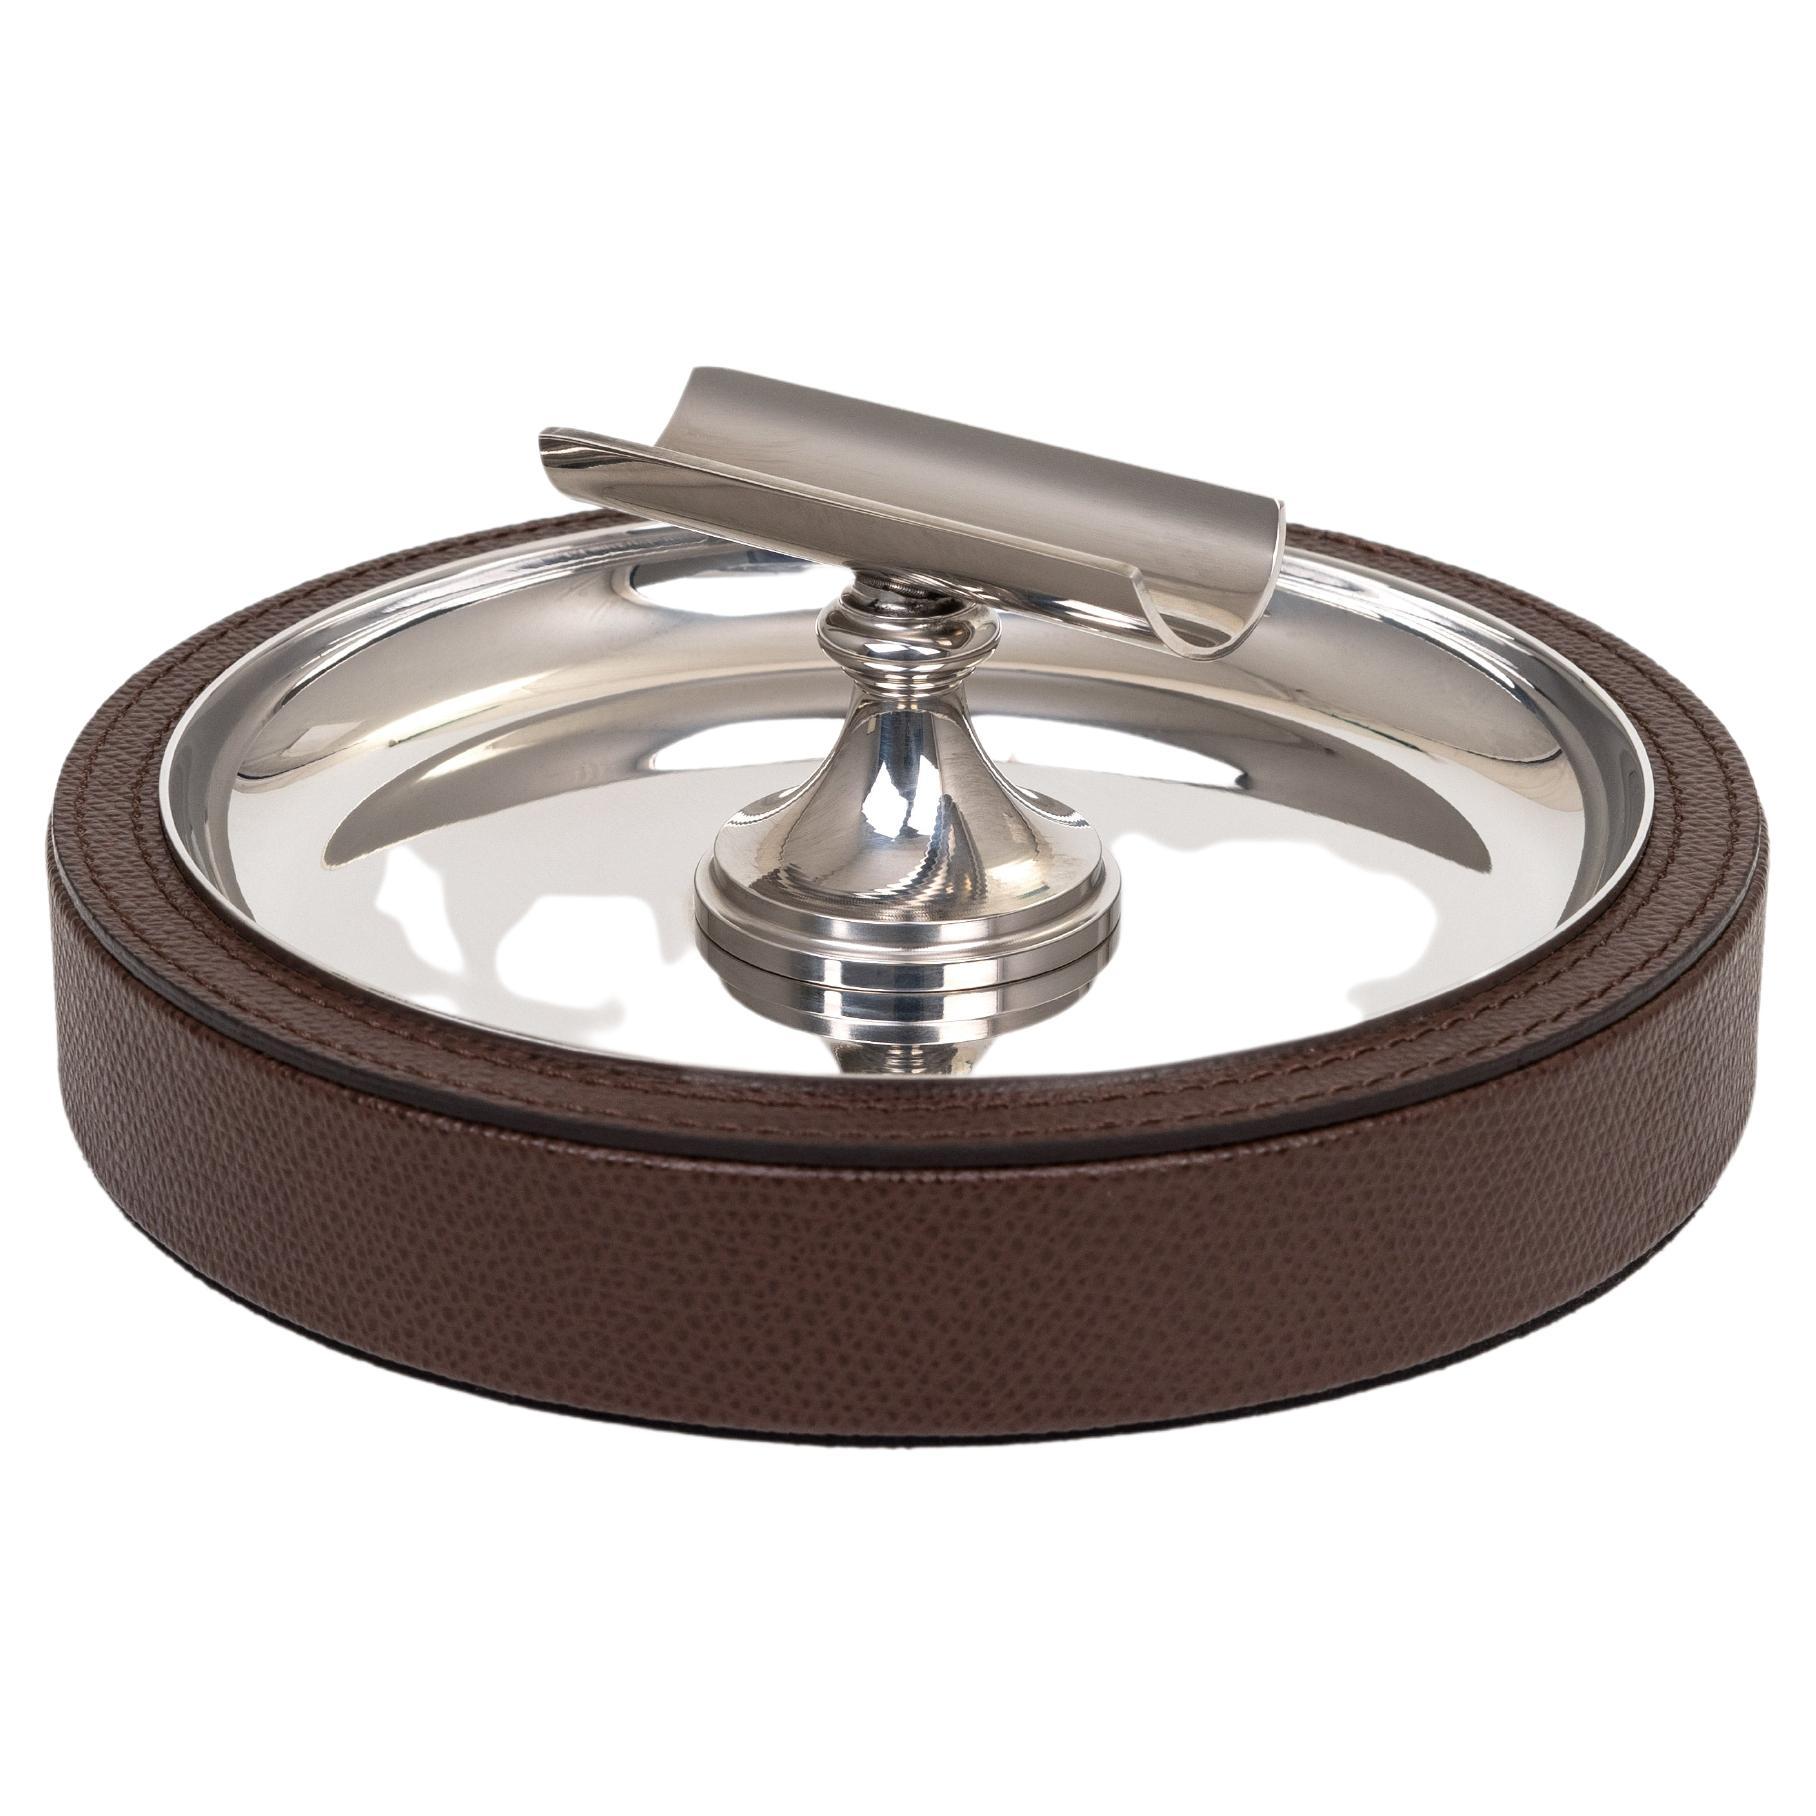 21st Century Leather Cigar Ashtray Handcrafted in Italy